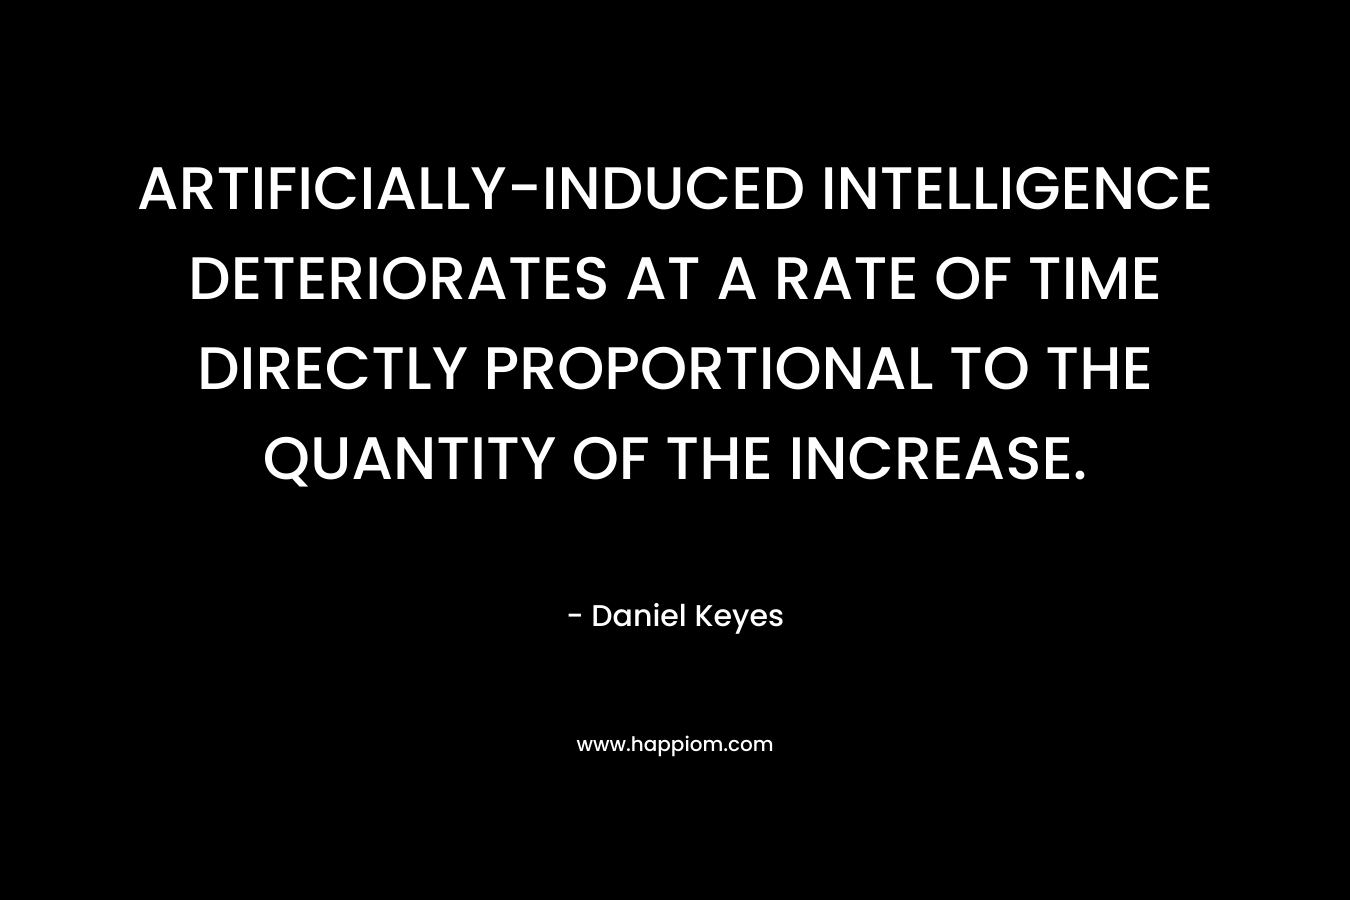 ARTIFICIALLY-INDUCED INTELLIGENCE DETERIORATES AT A RATE OF TIME DIRECTLY PROPORTIONAL TO THE QUANTITY OF THE INCREASE.